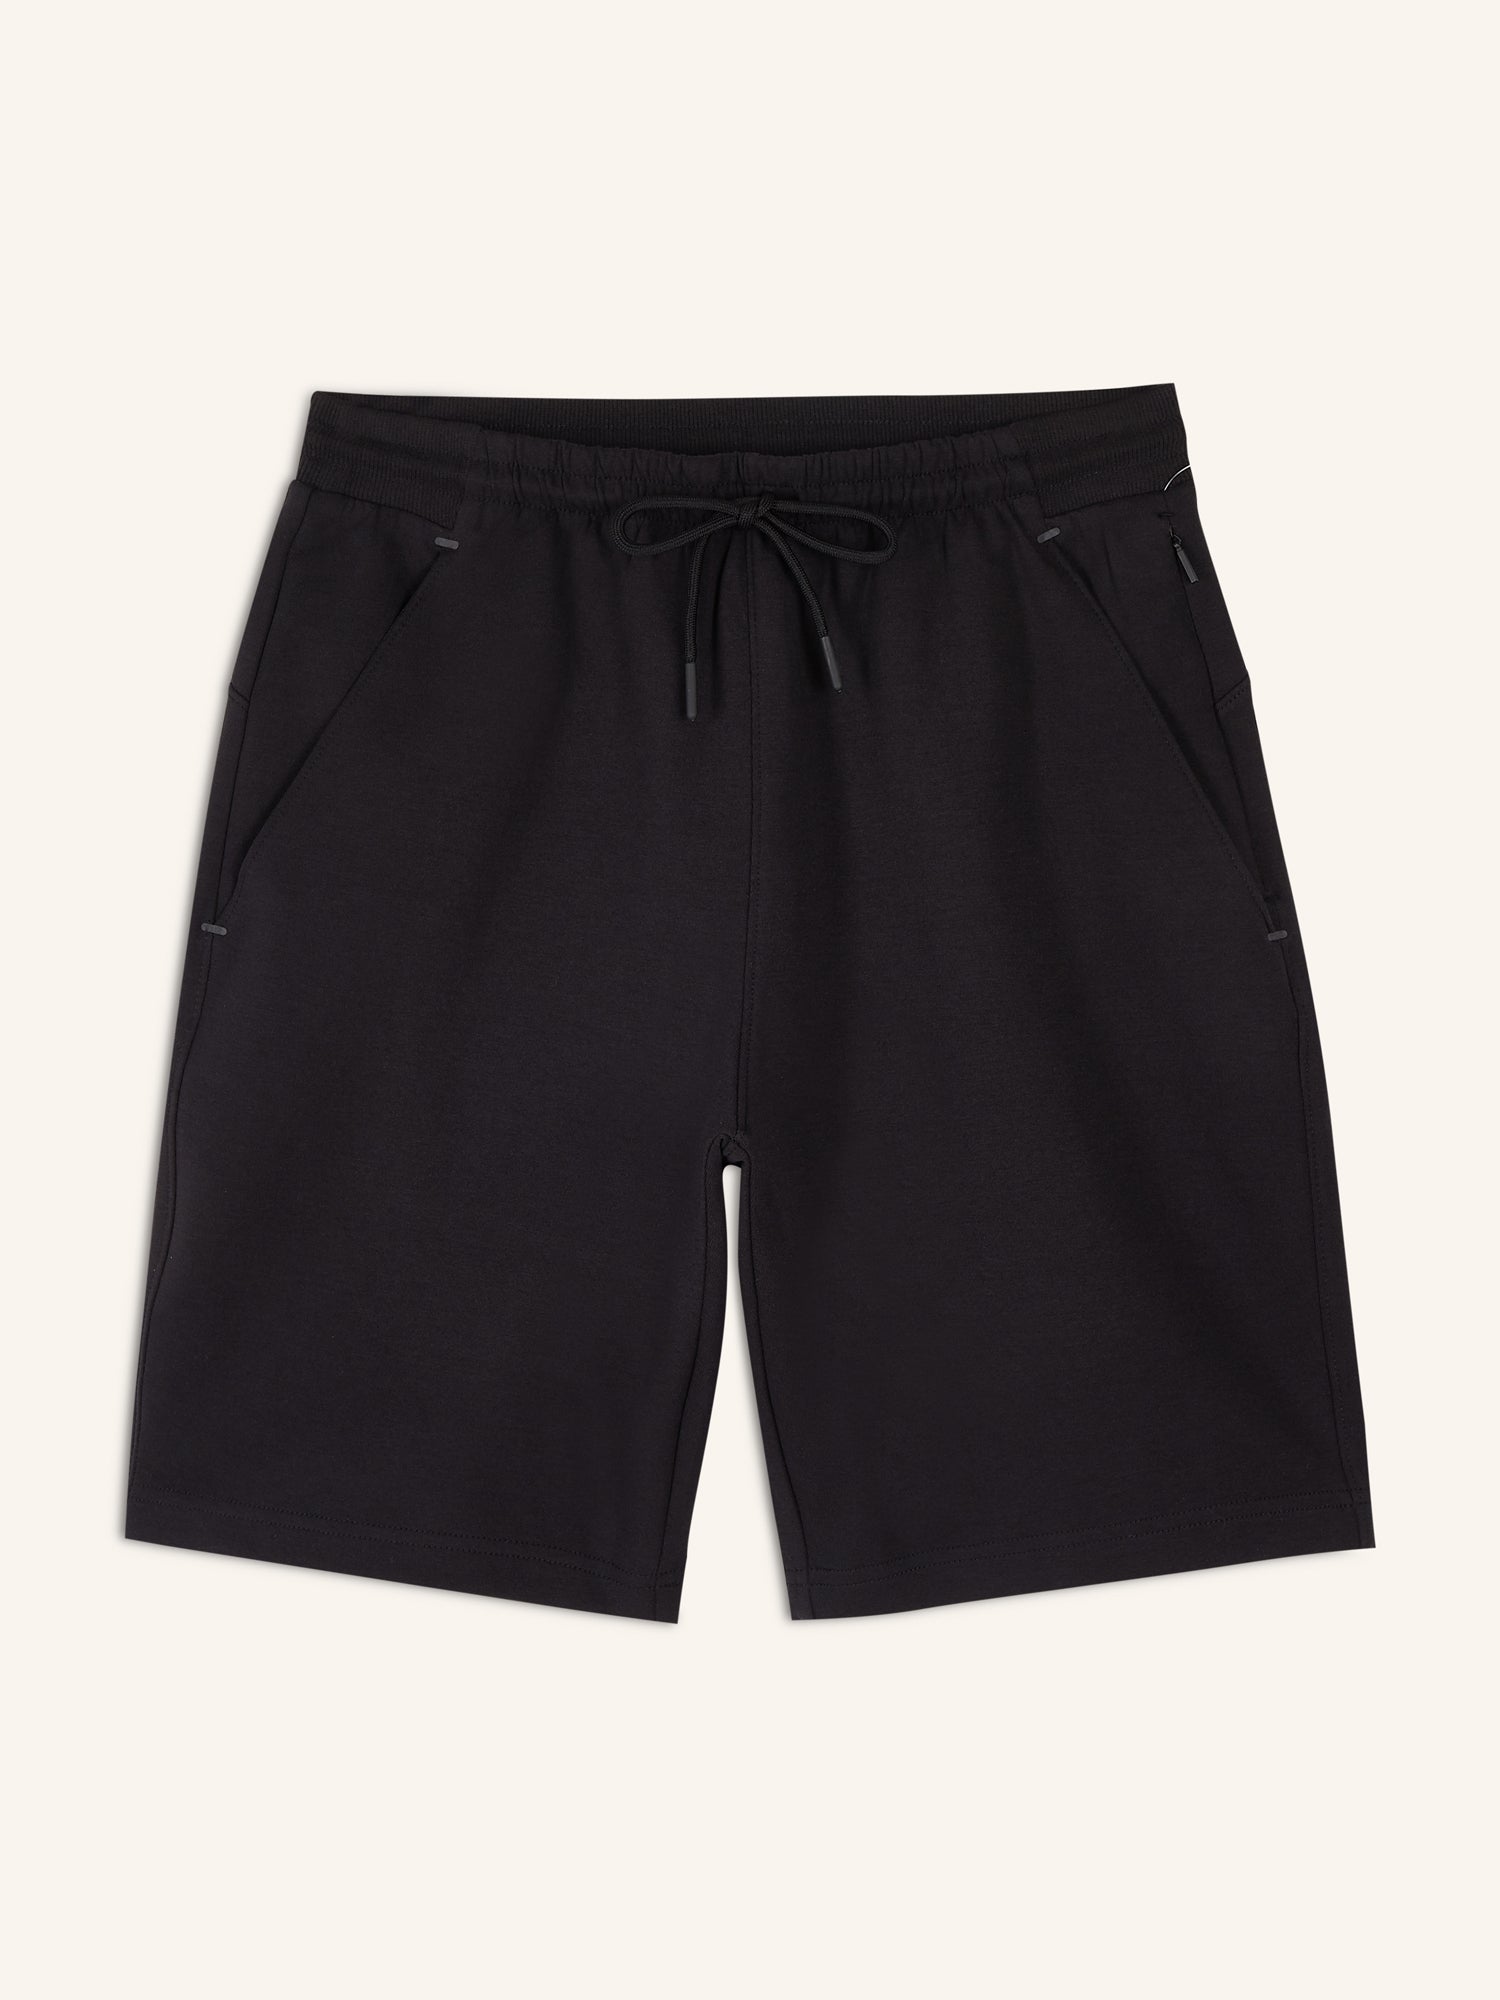 Dynamic Fleece Sweat Shorts for Men -- 7-inch inseam - Old Navy Philippines